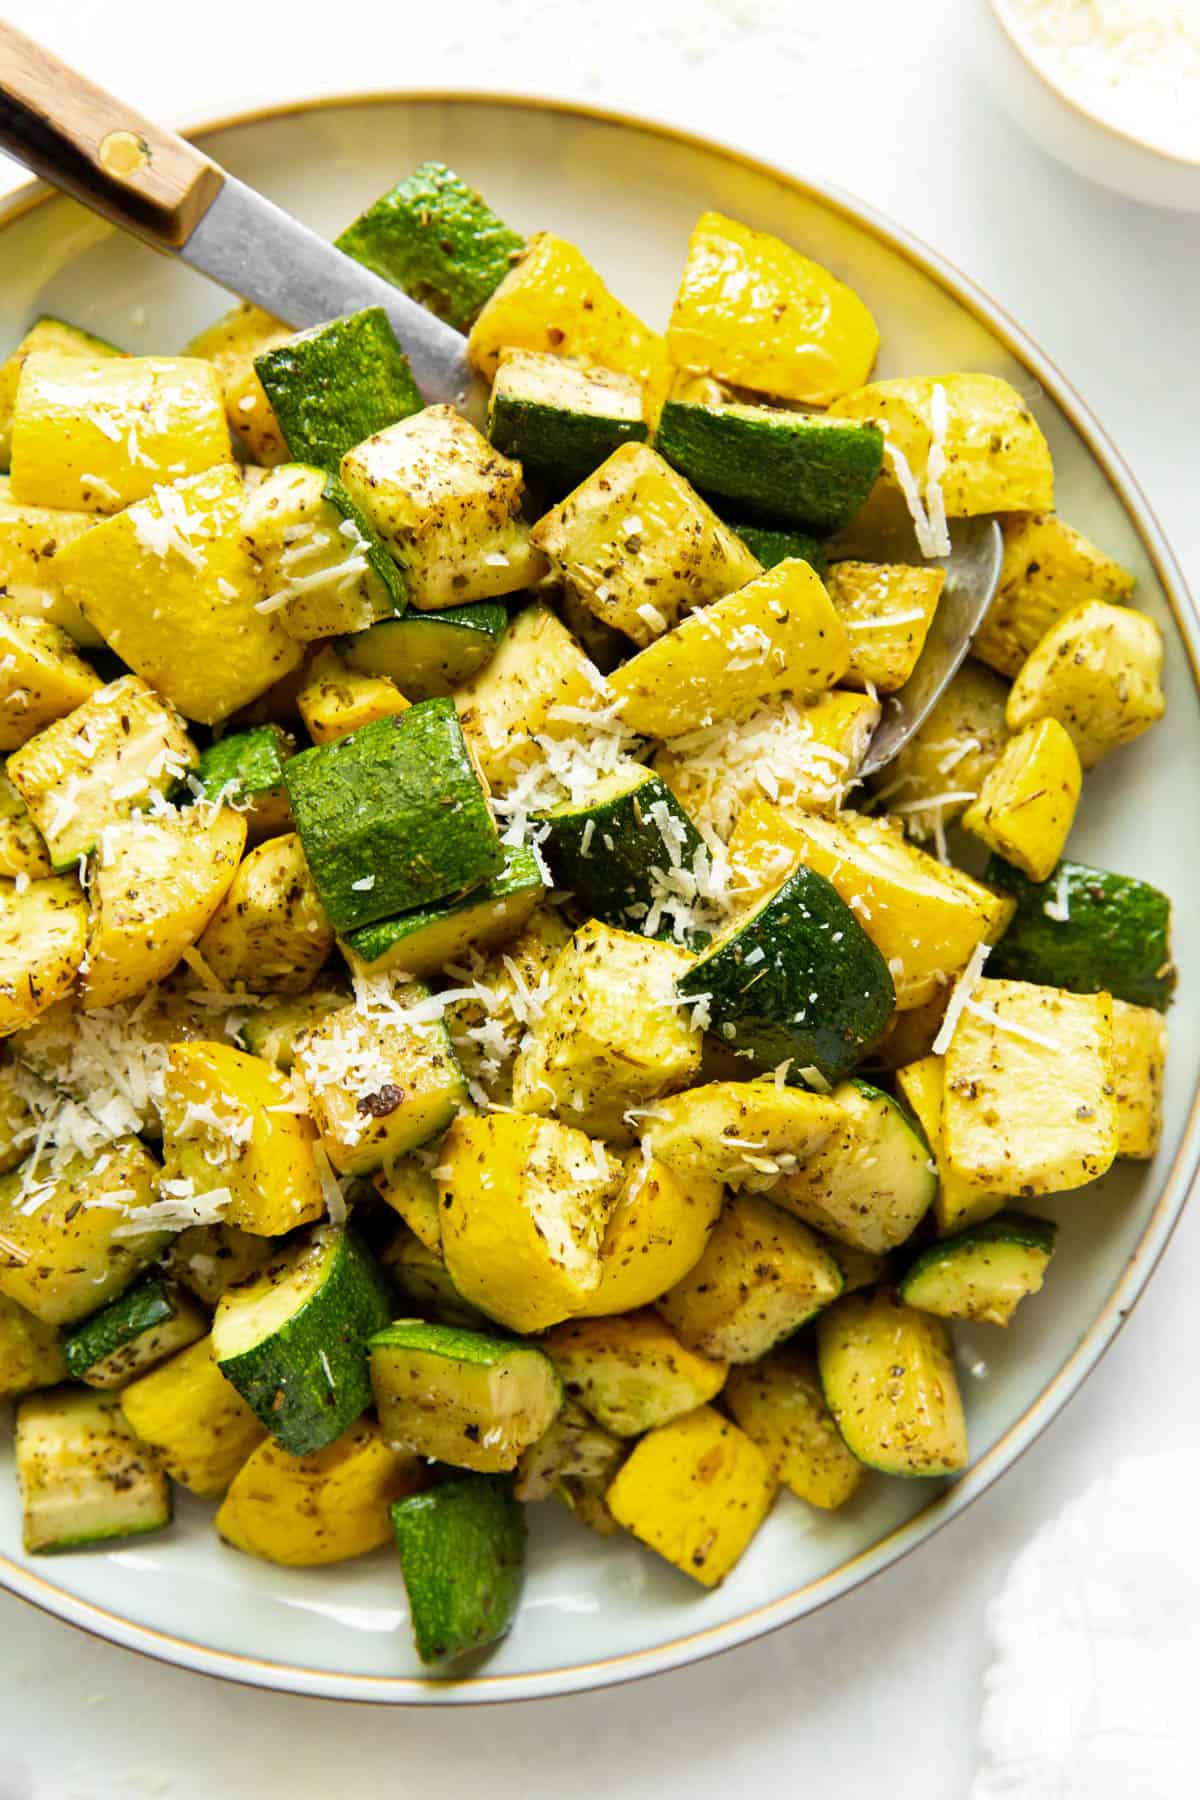 baked zucchini and squash sprinkled with parmesan cheese